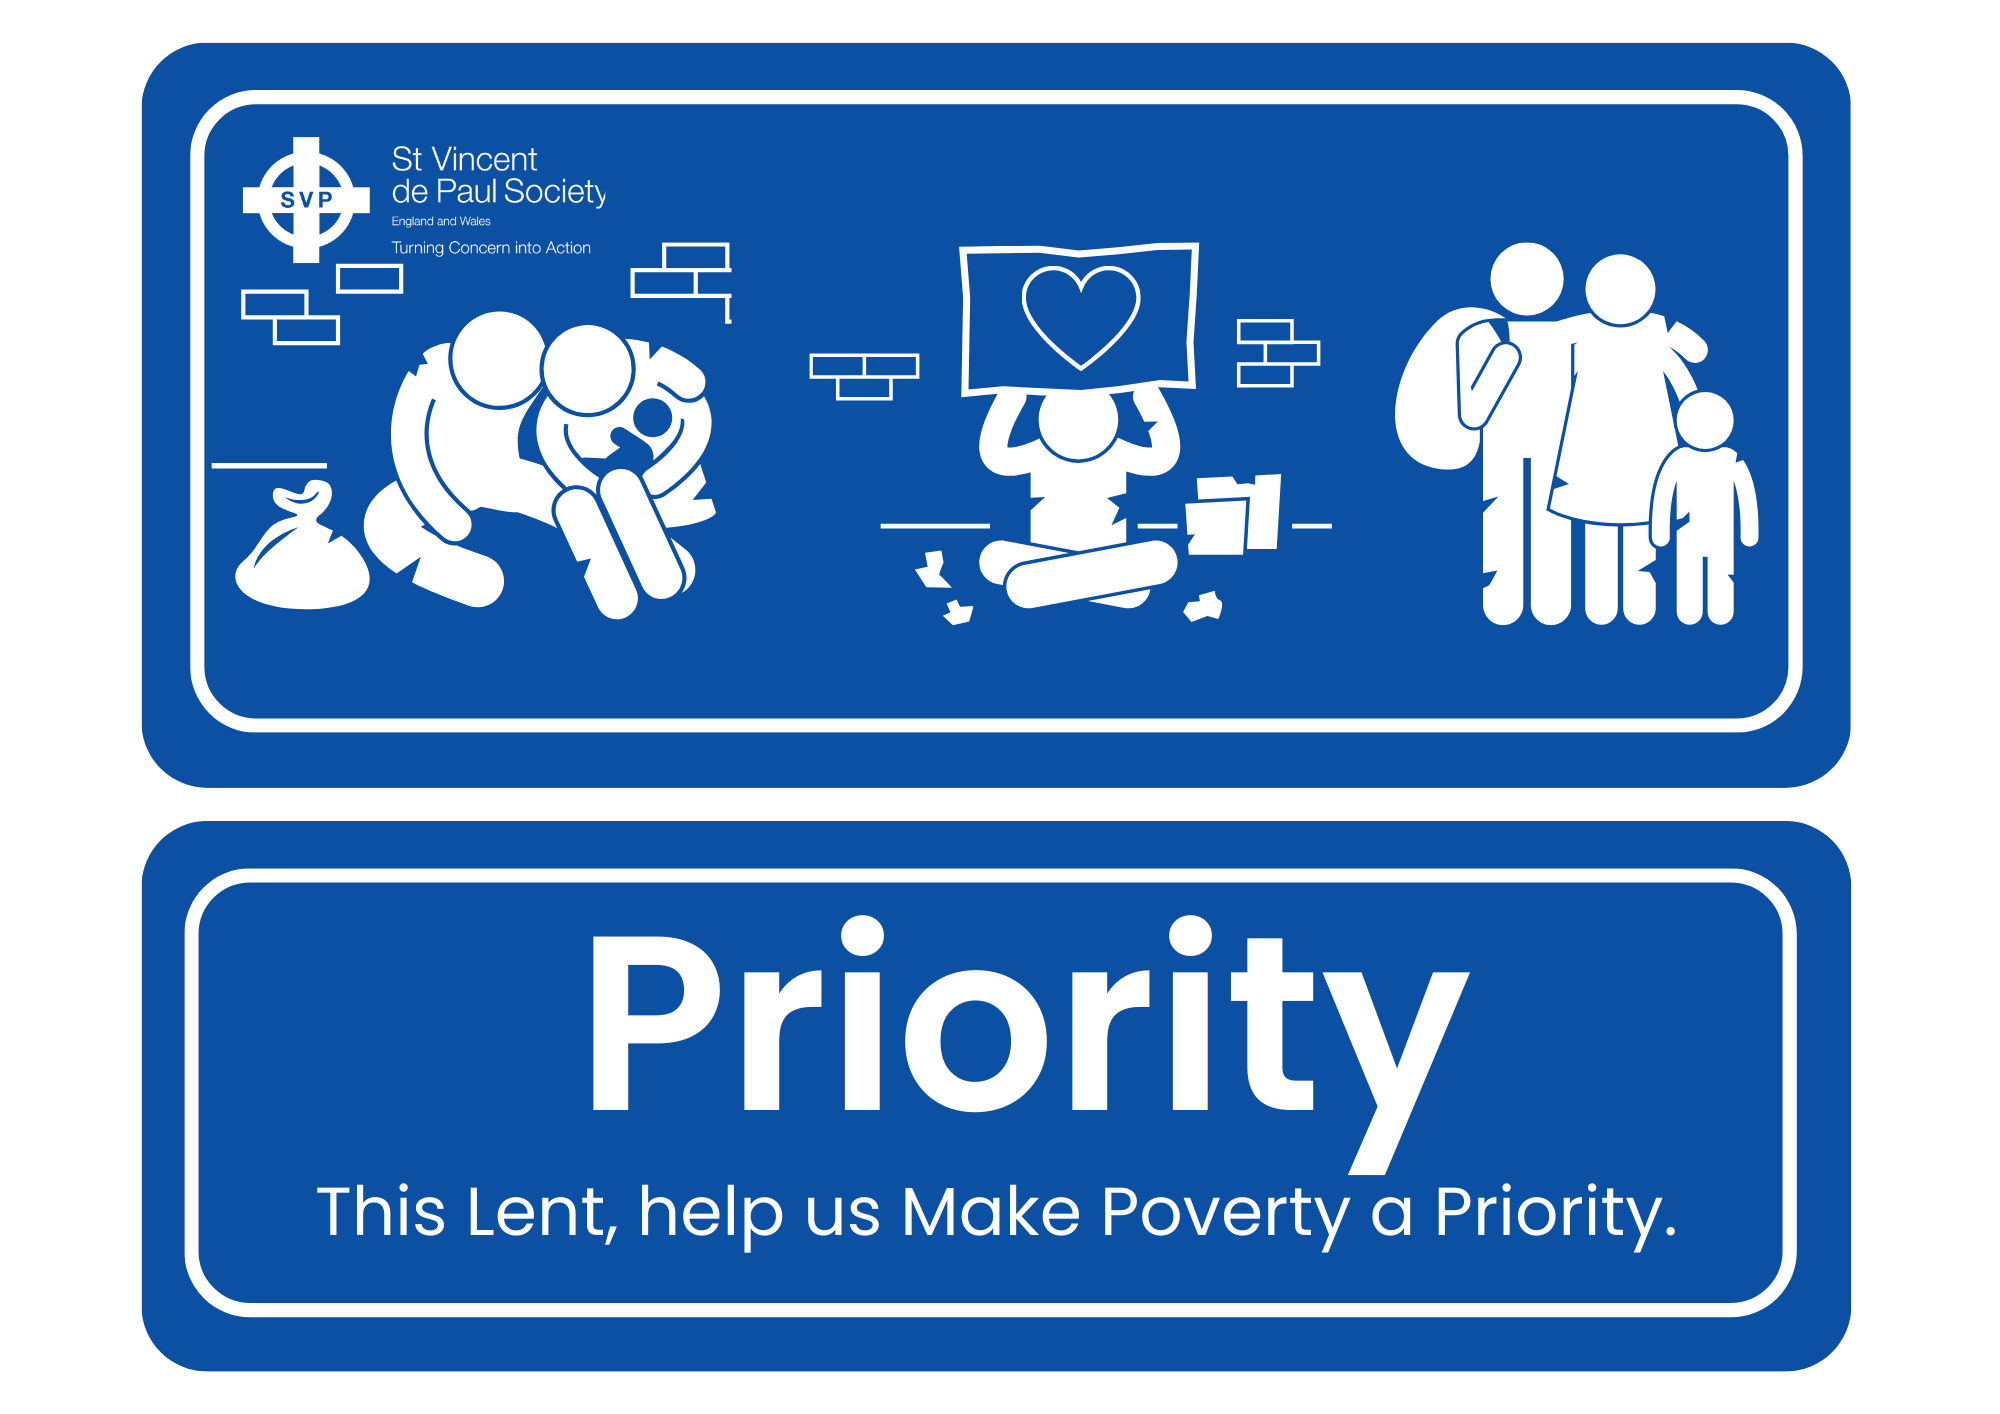 This is the Make the Priority logo